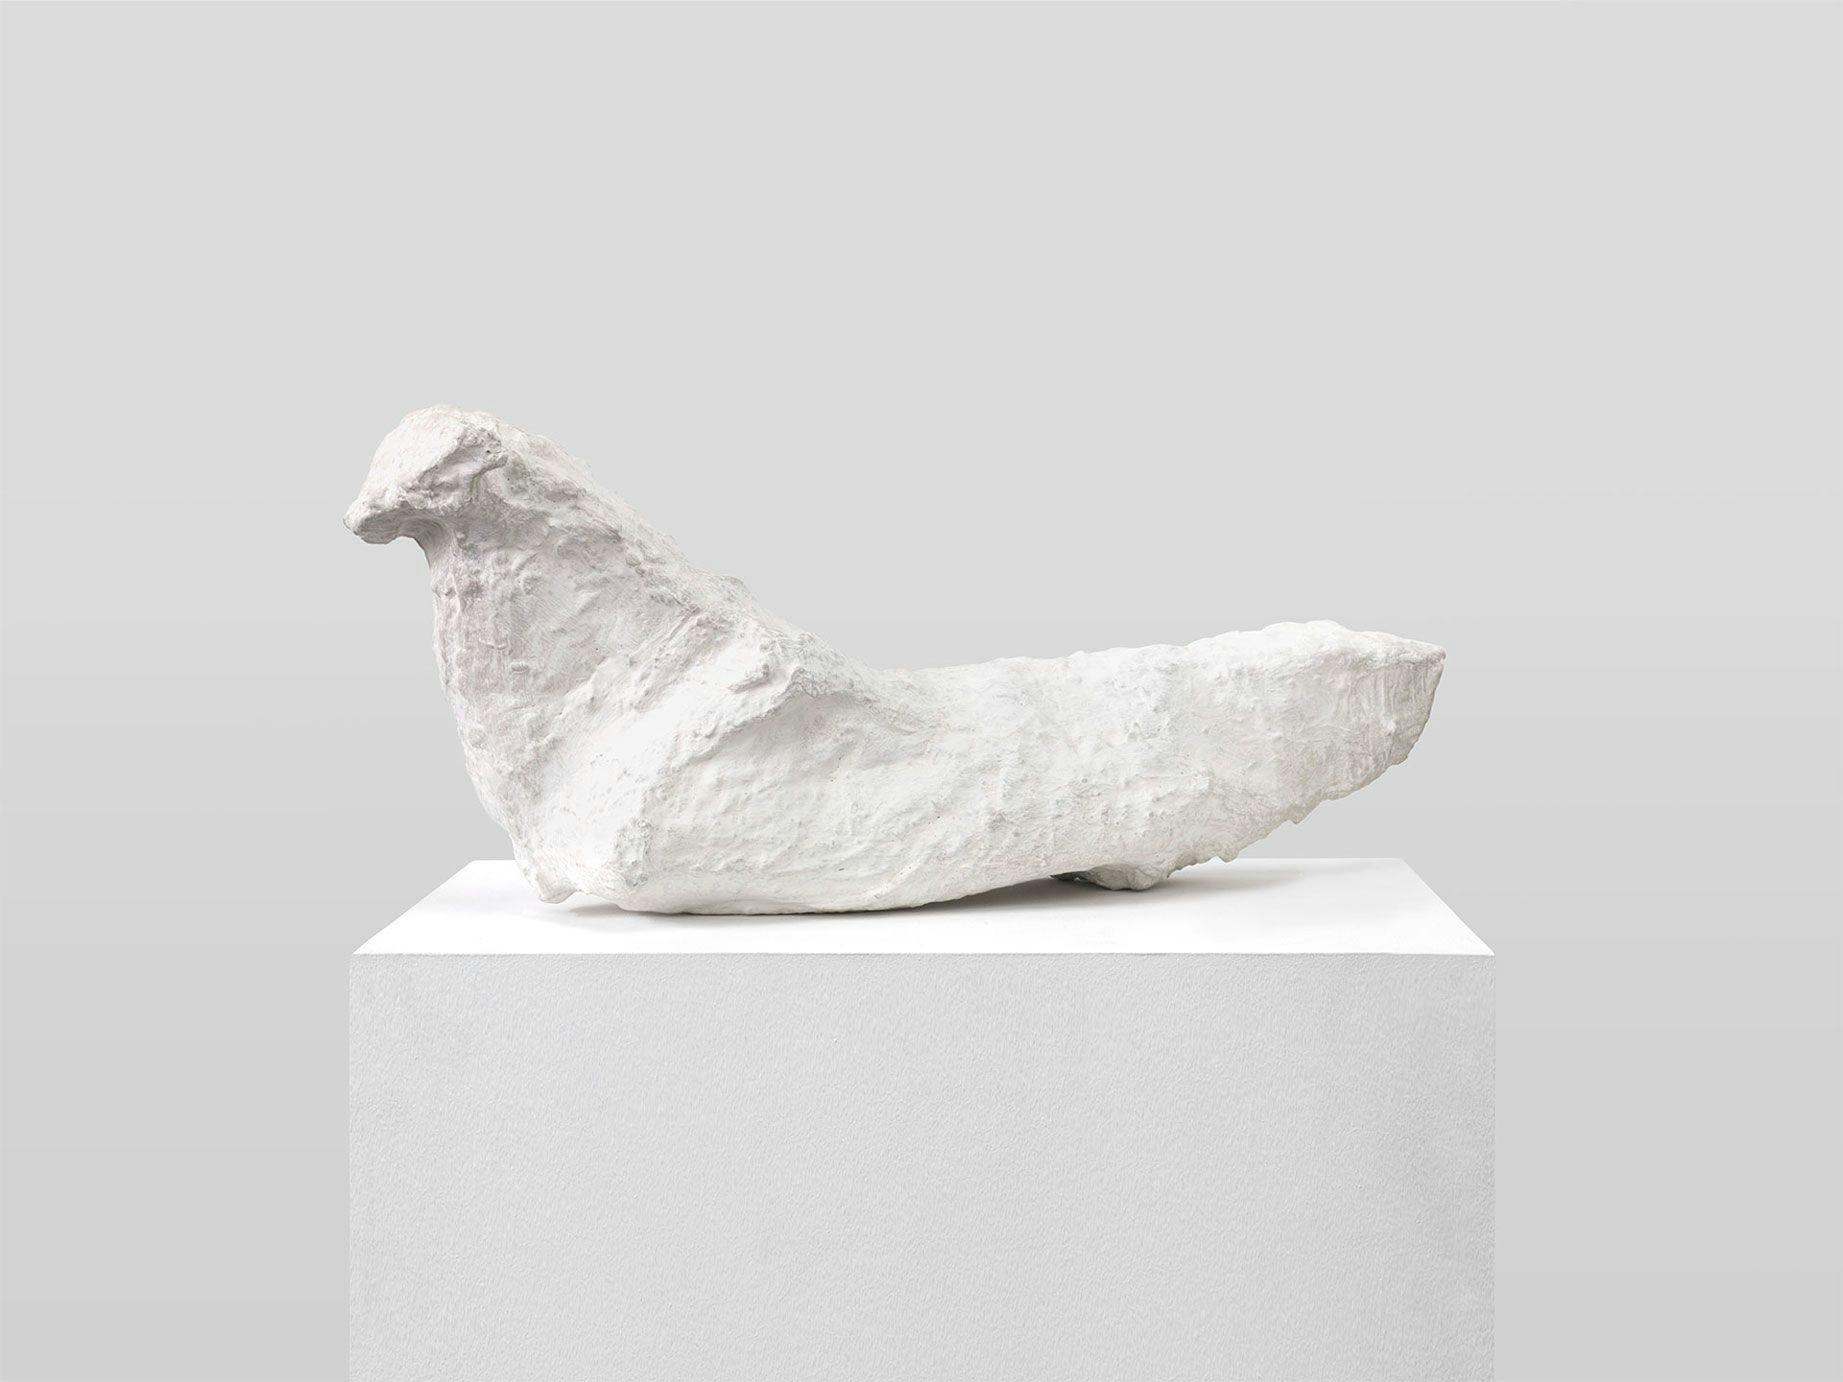 A mixed media sculpture by Franz West, titled BI 11, dated 1990.